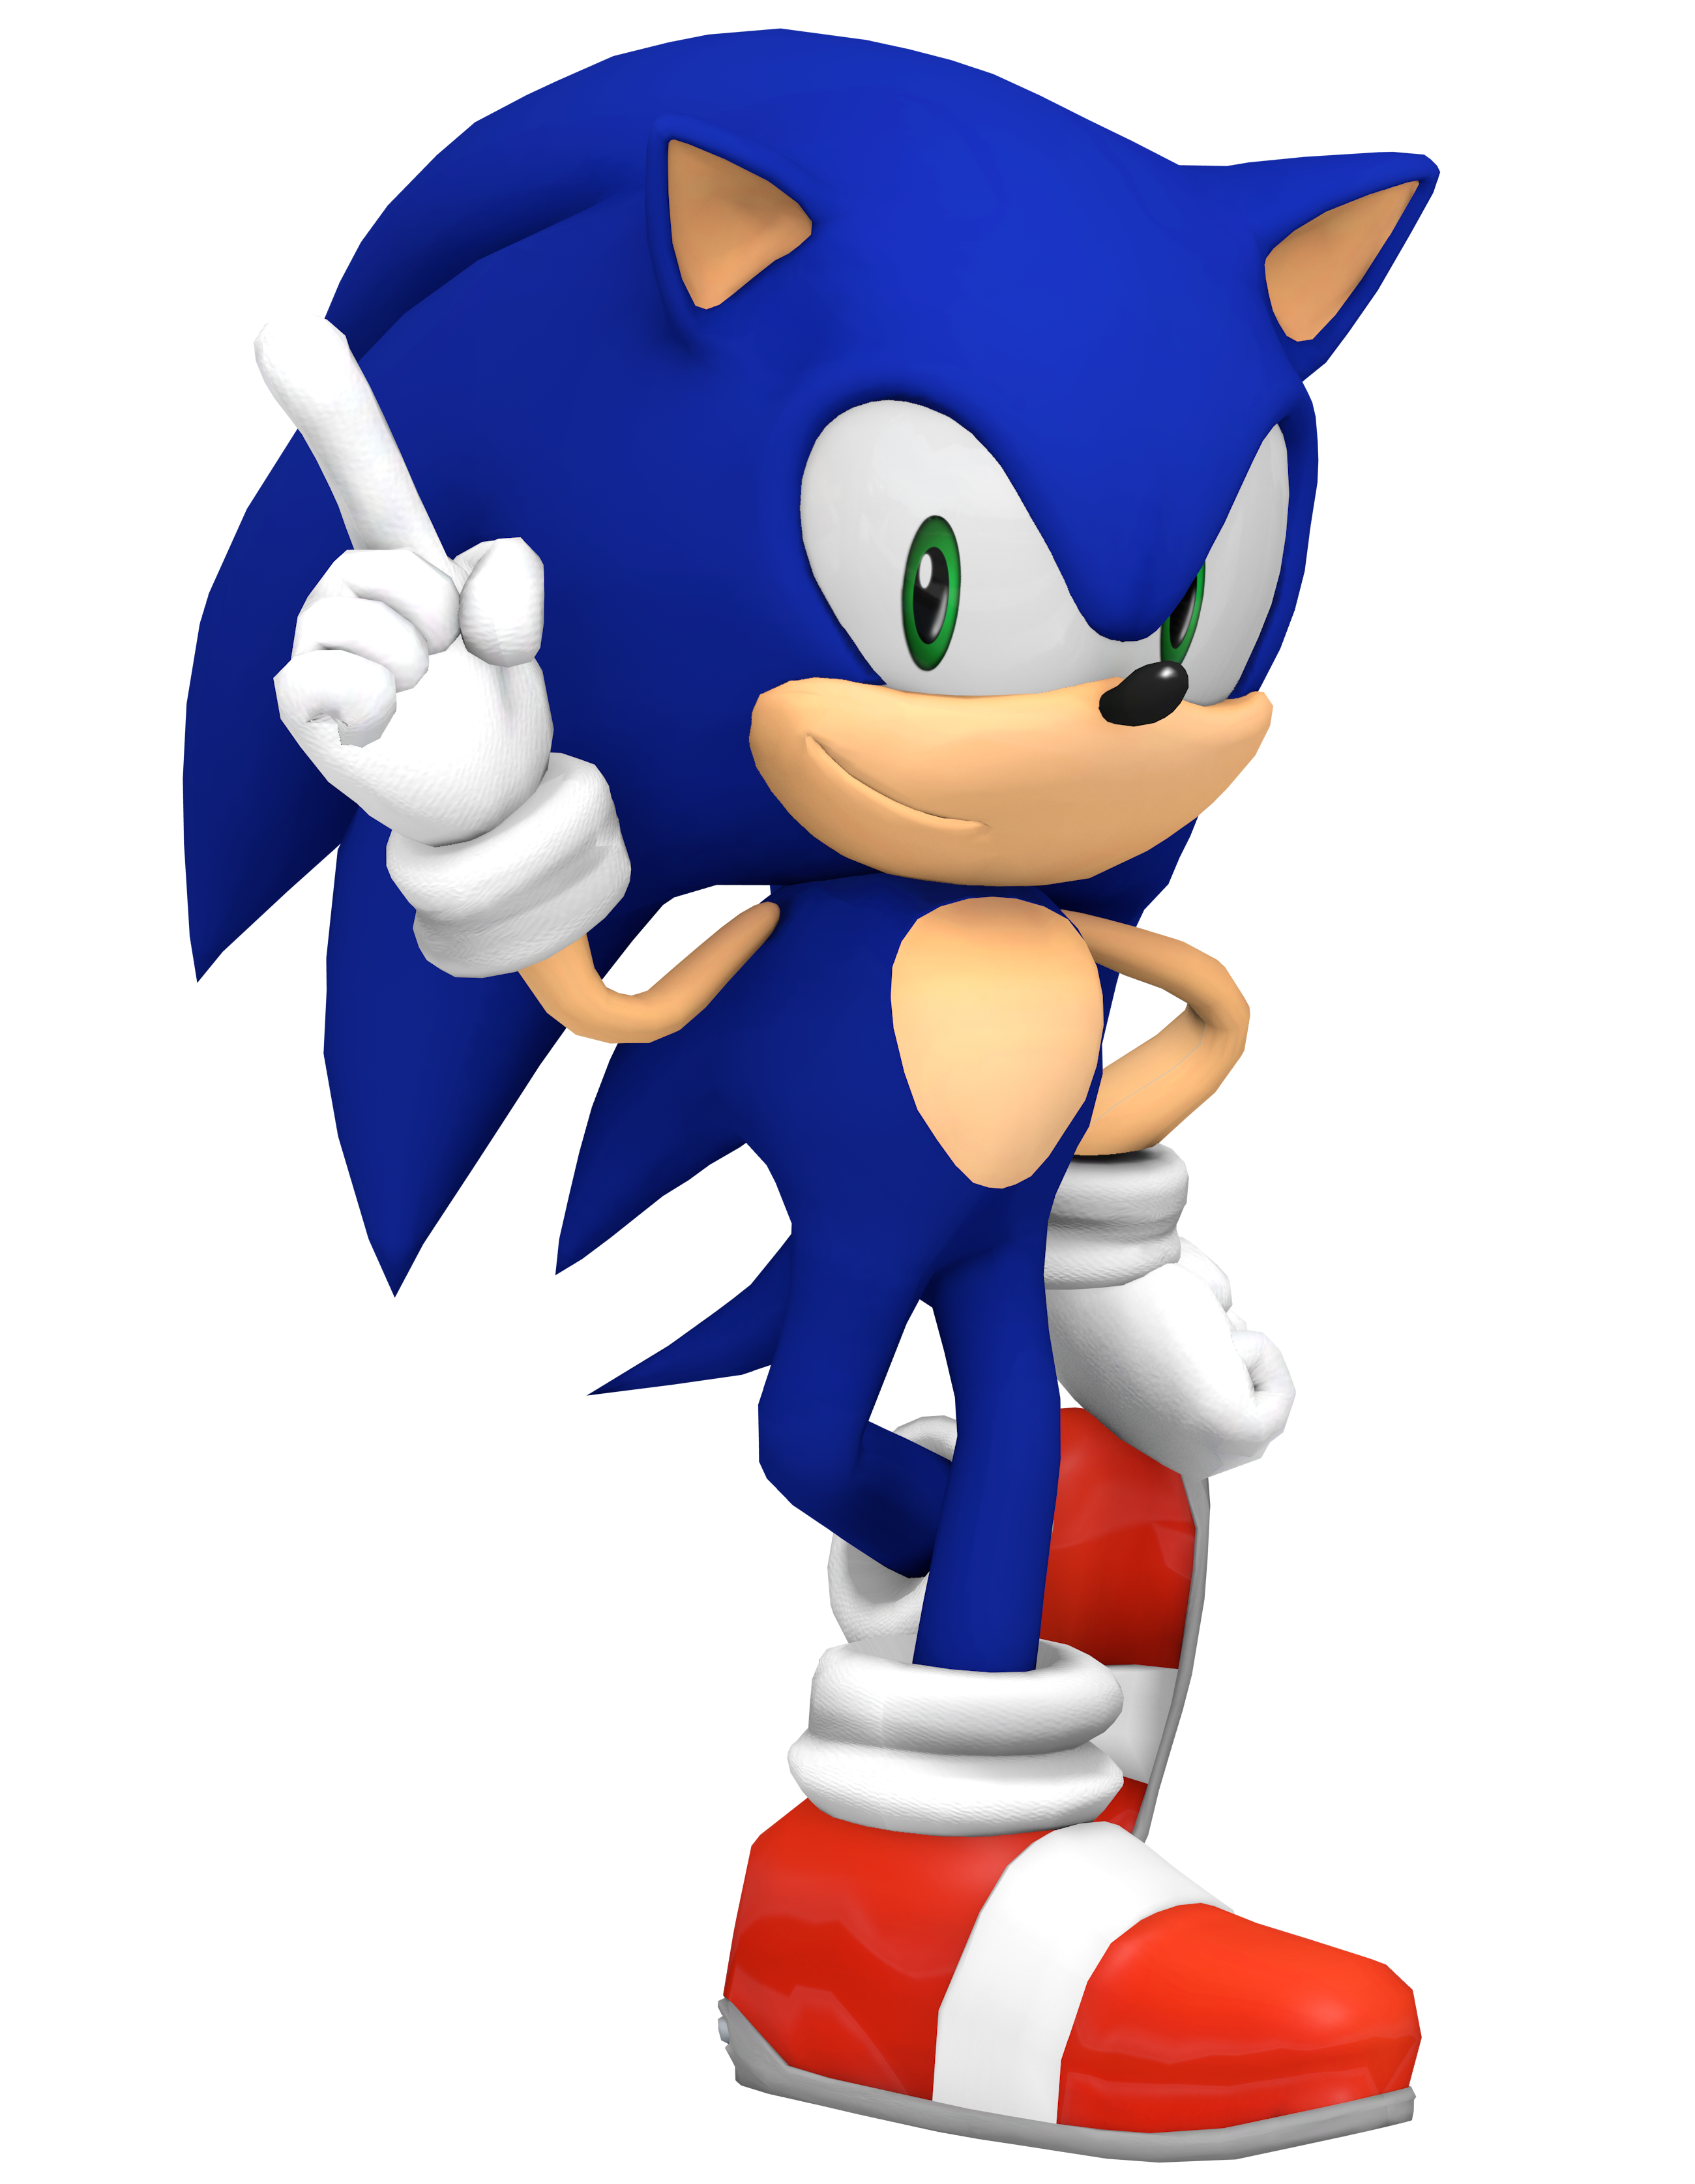 Classic Tails - Classic Render by bandicootbrawl96 on DeviantArt